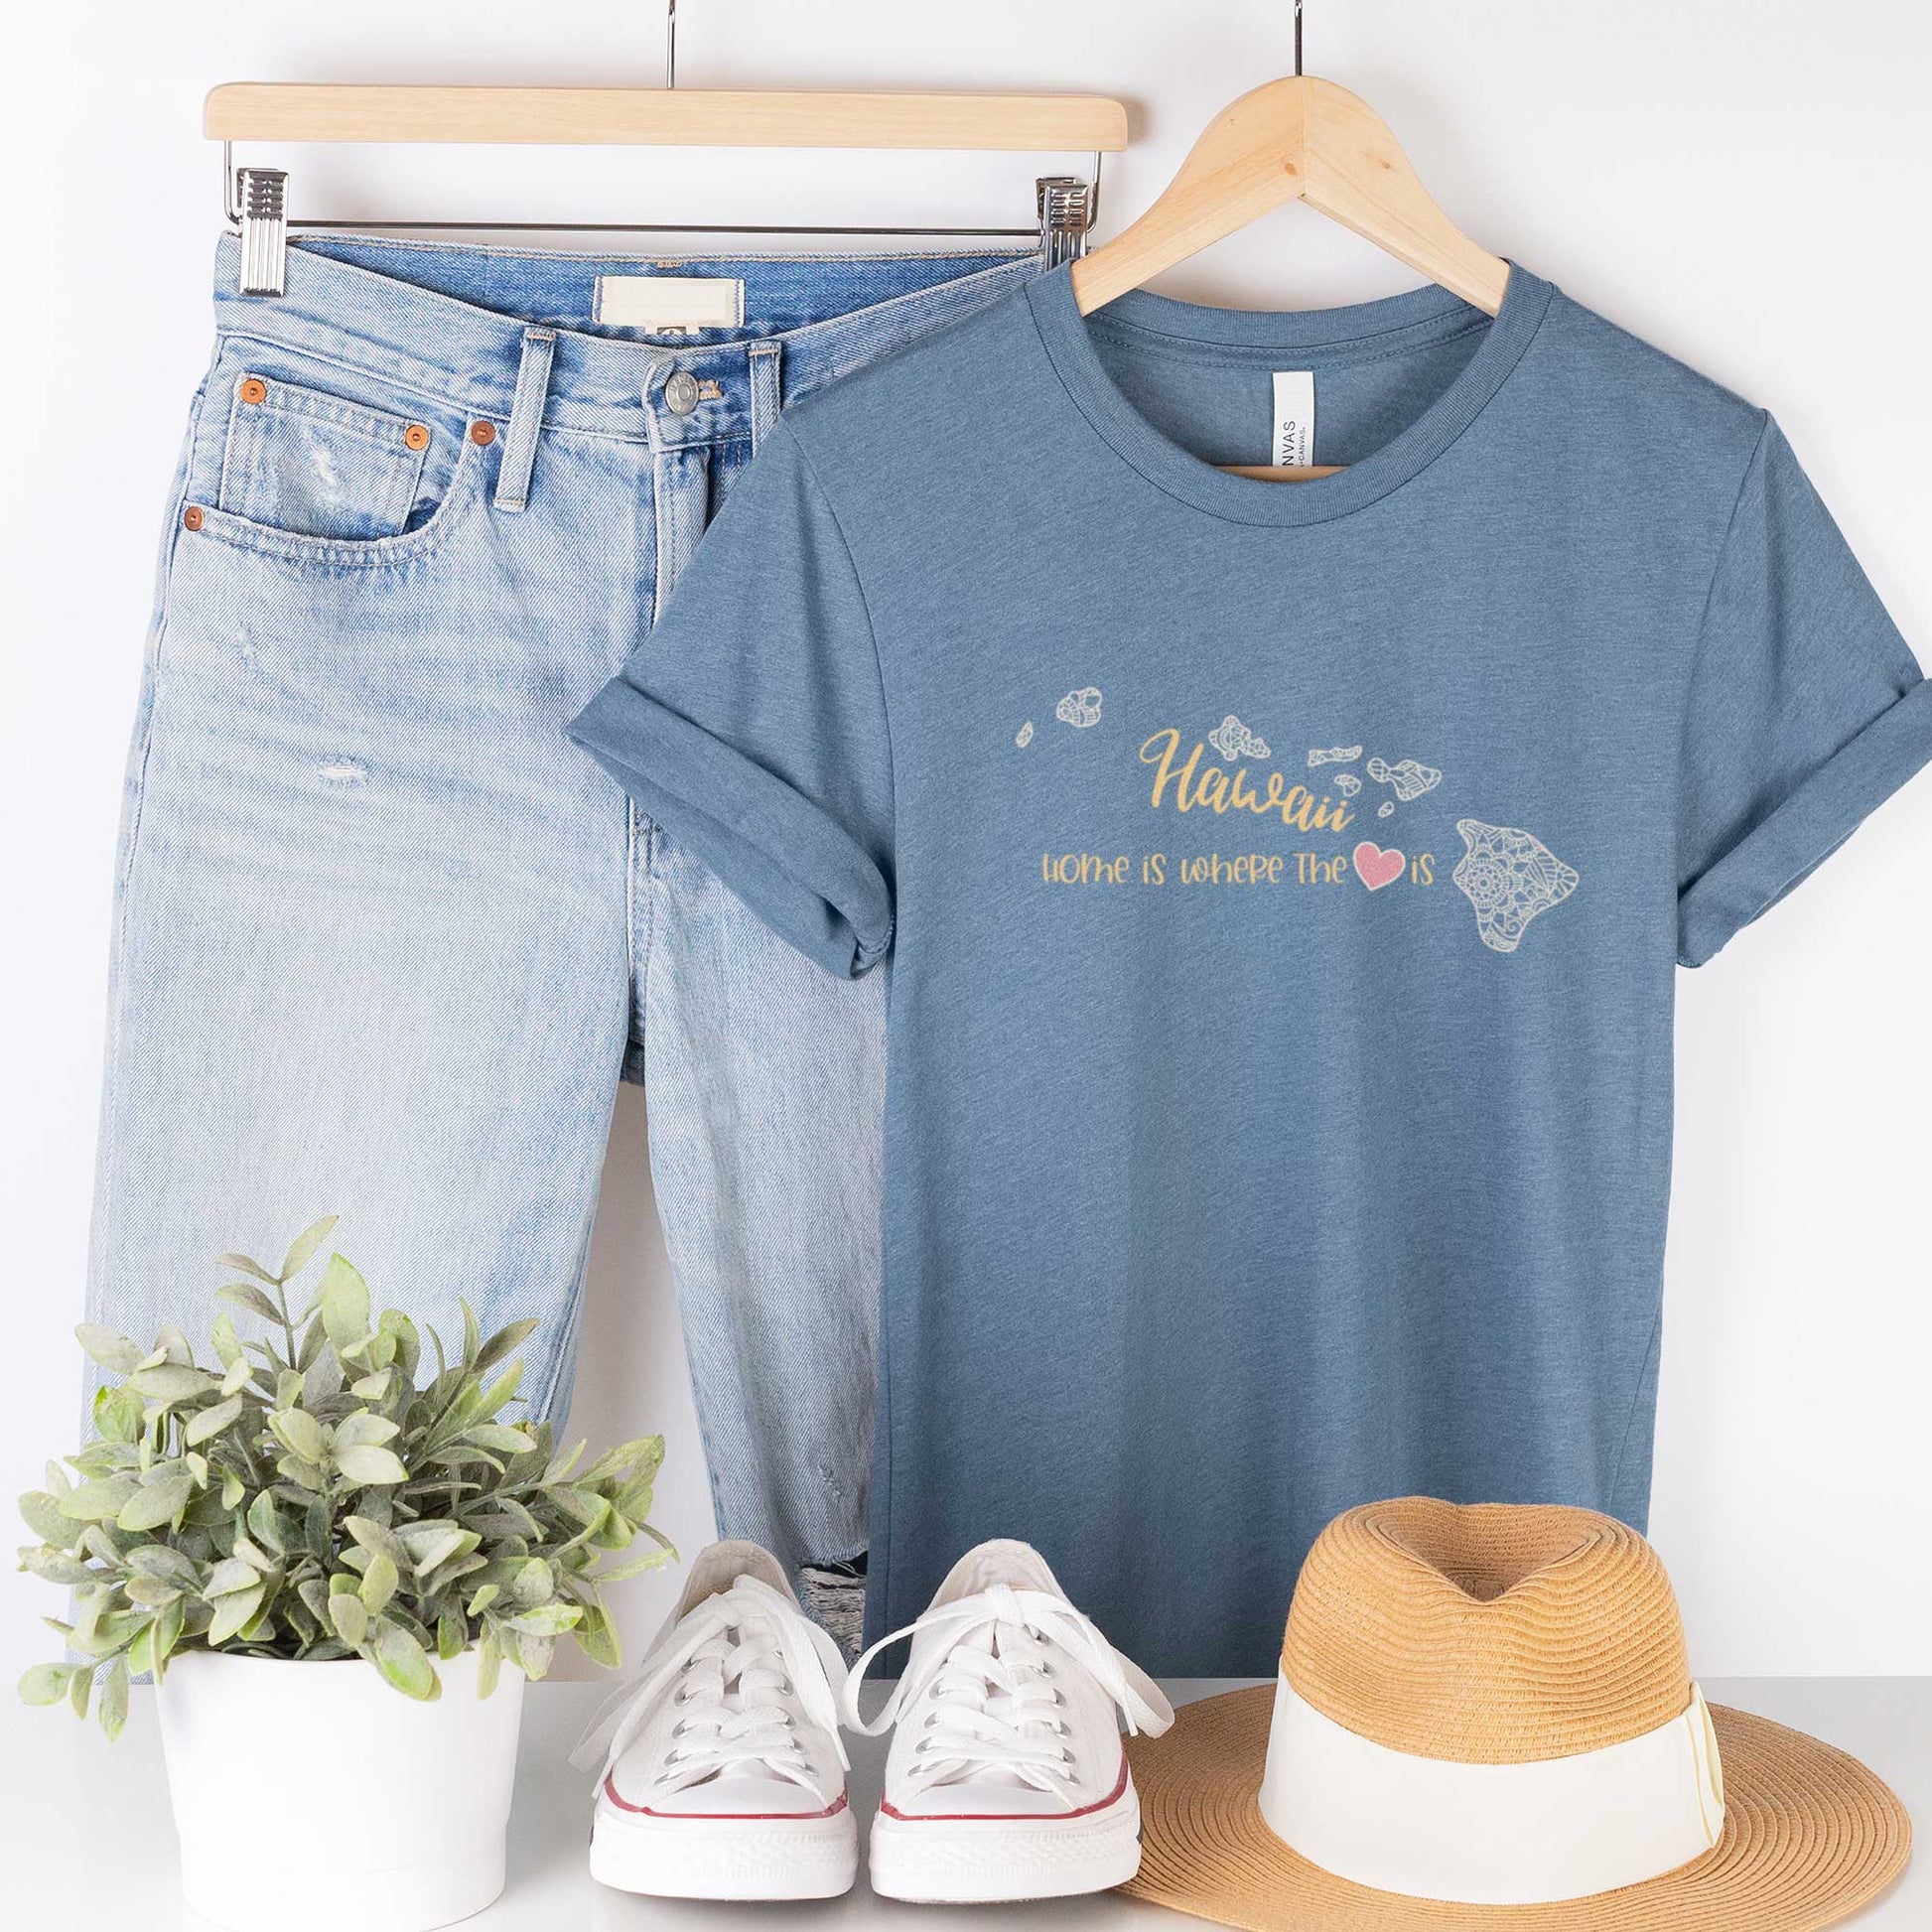 A hanging heather slate Bella Canvas t-shirt featuring a mandala in the shape of Hawaii with the words home is where the heart is.